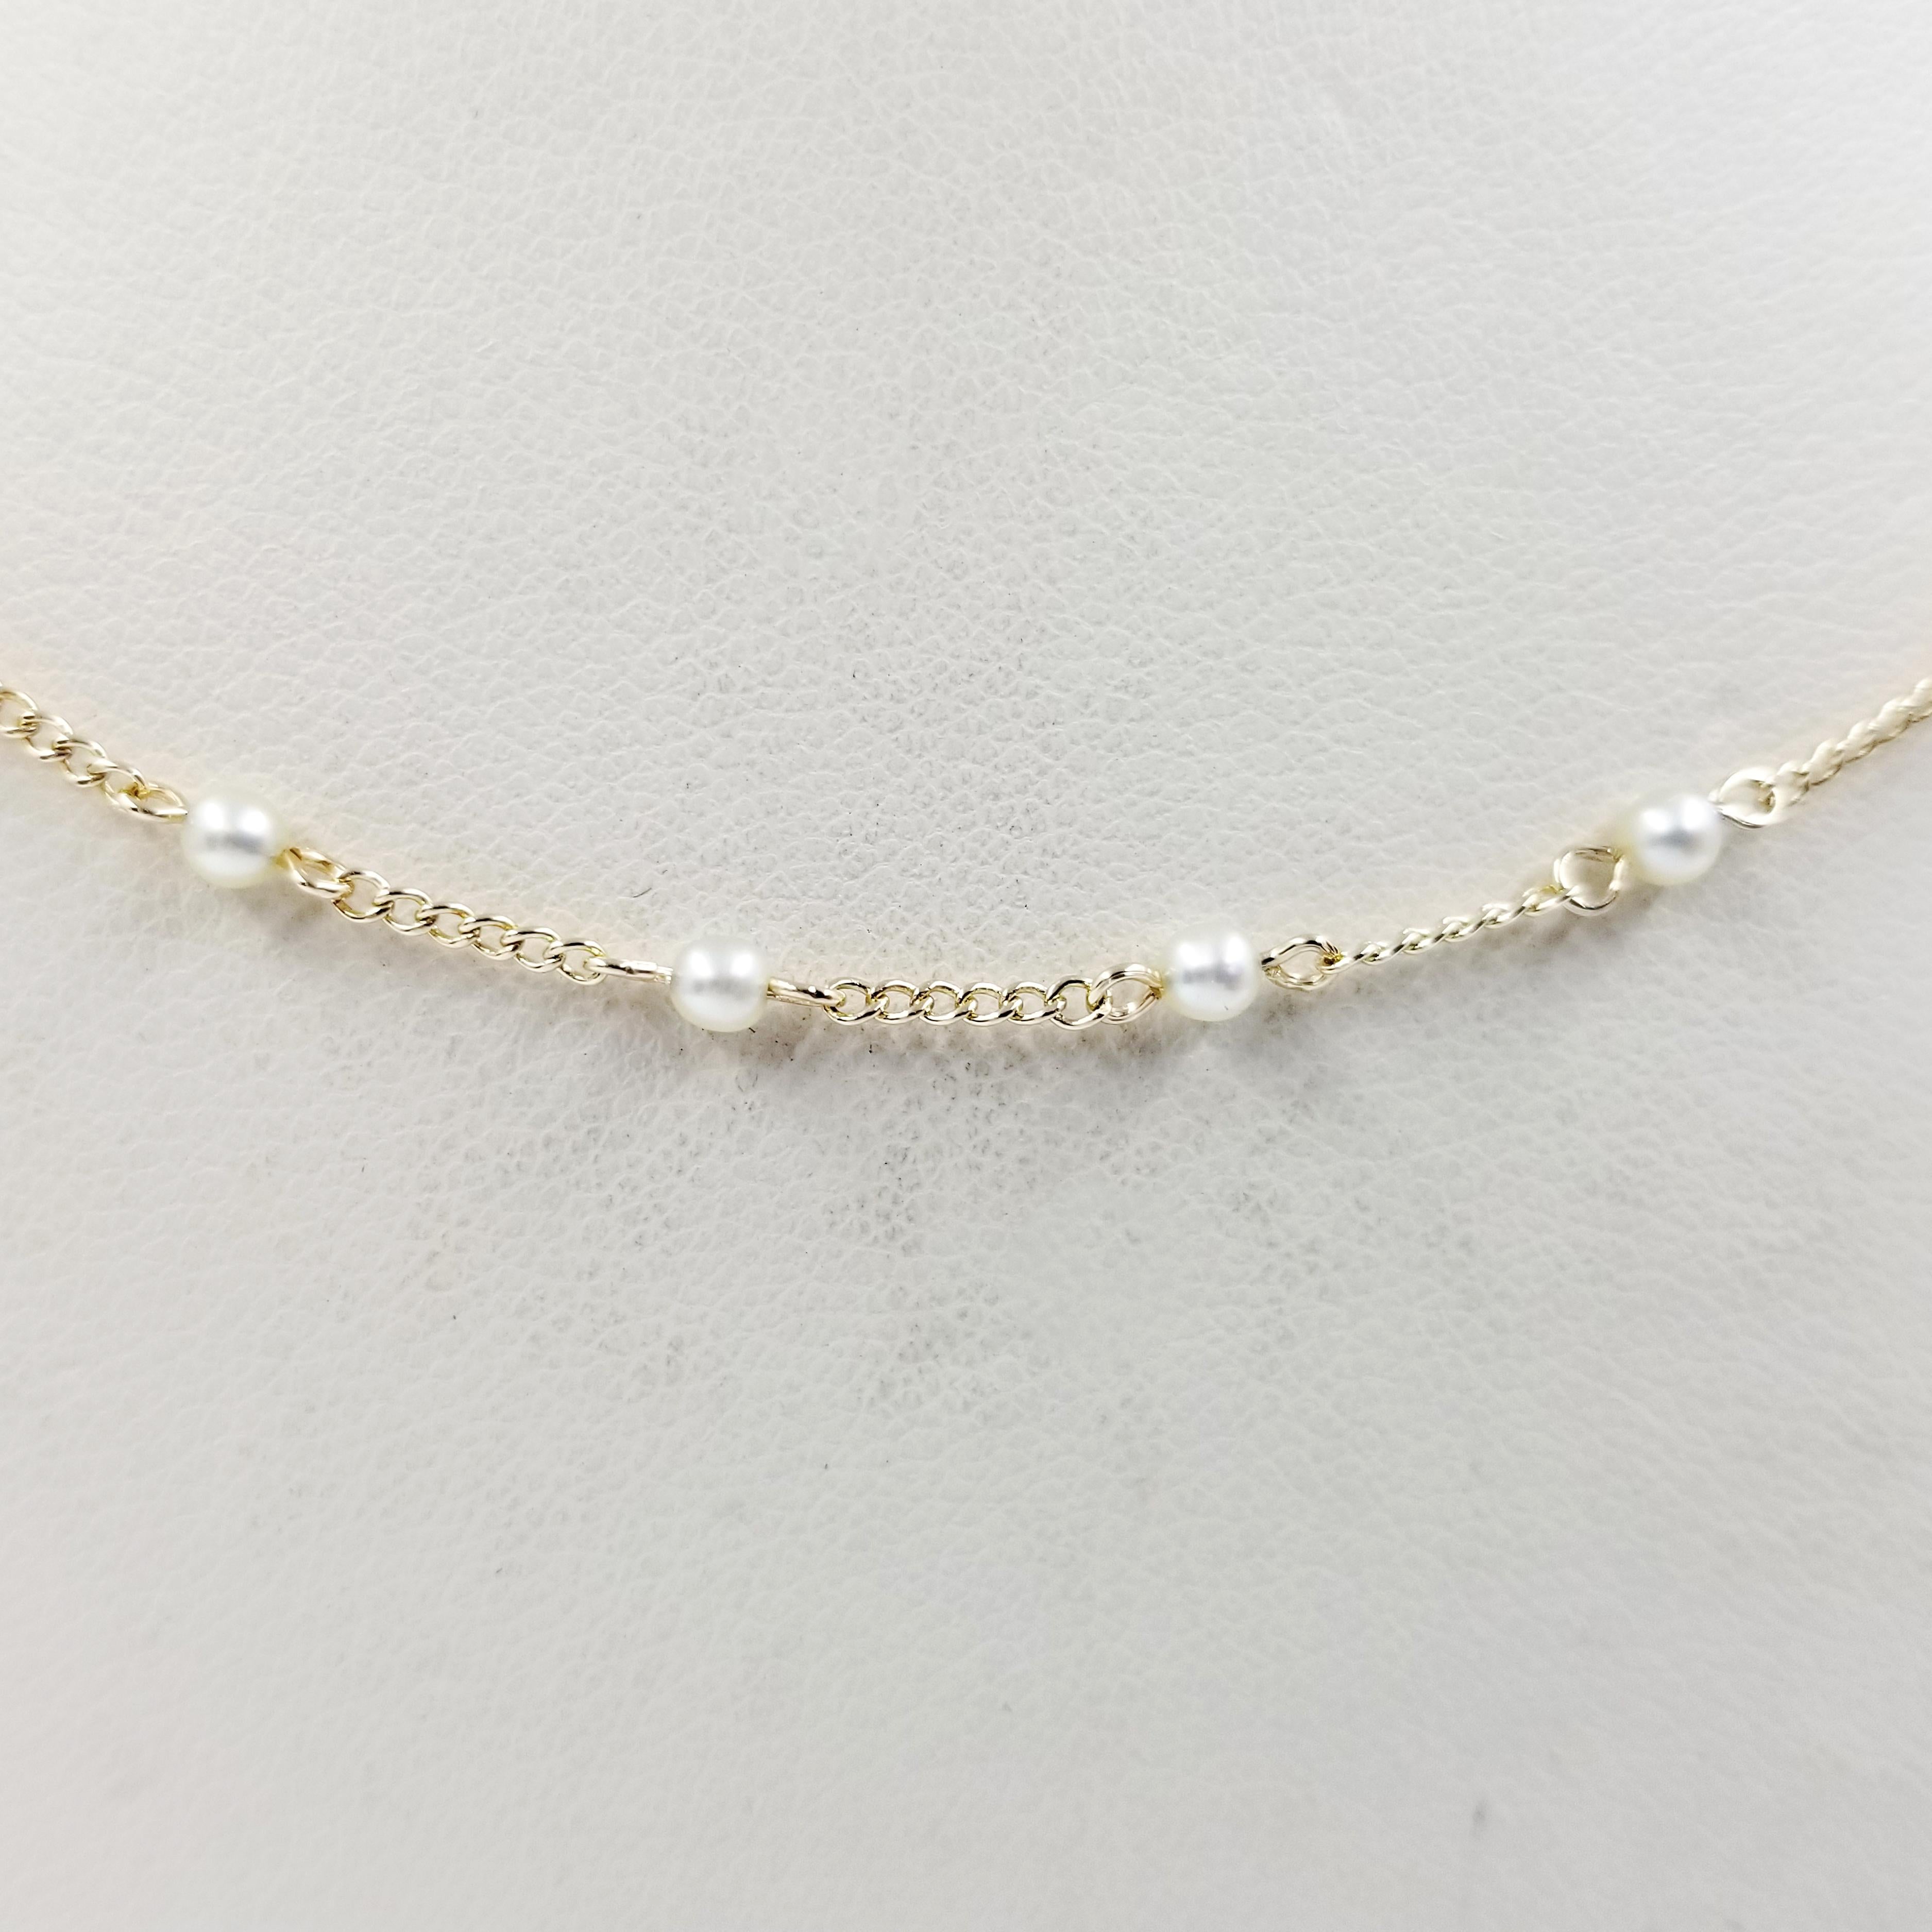 14 Karat Yellow Gold Necklace with Small Cultured Round Pearls. Length is 15 Inches; this is a perfect length for a choker or child's necklace. Finished Weight is 2.3 Grams.